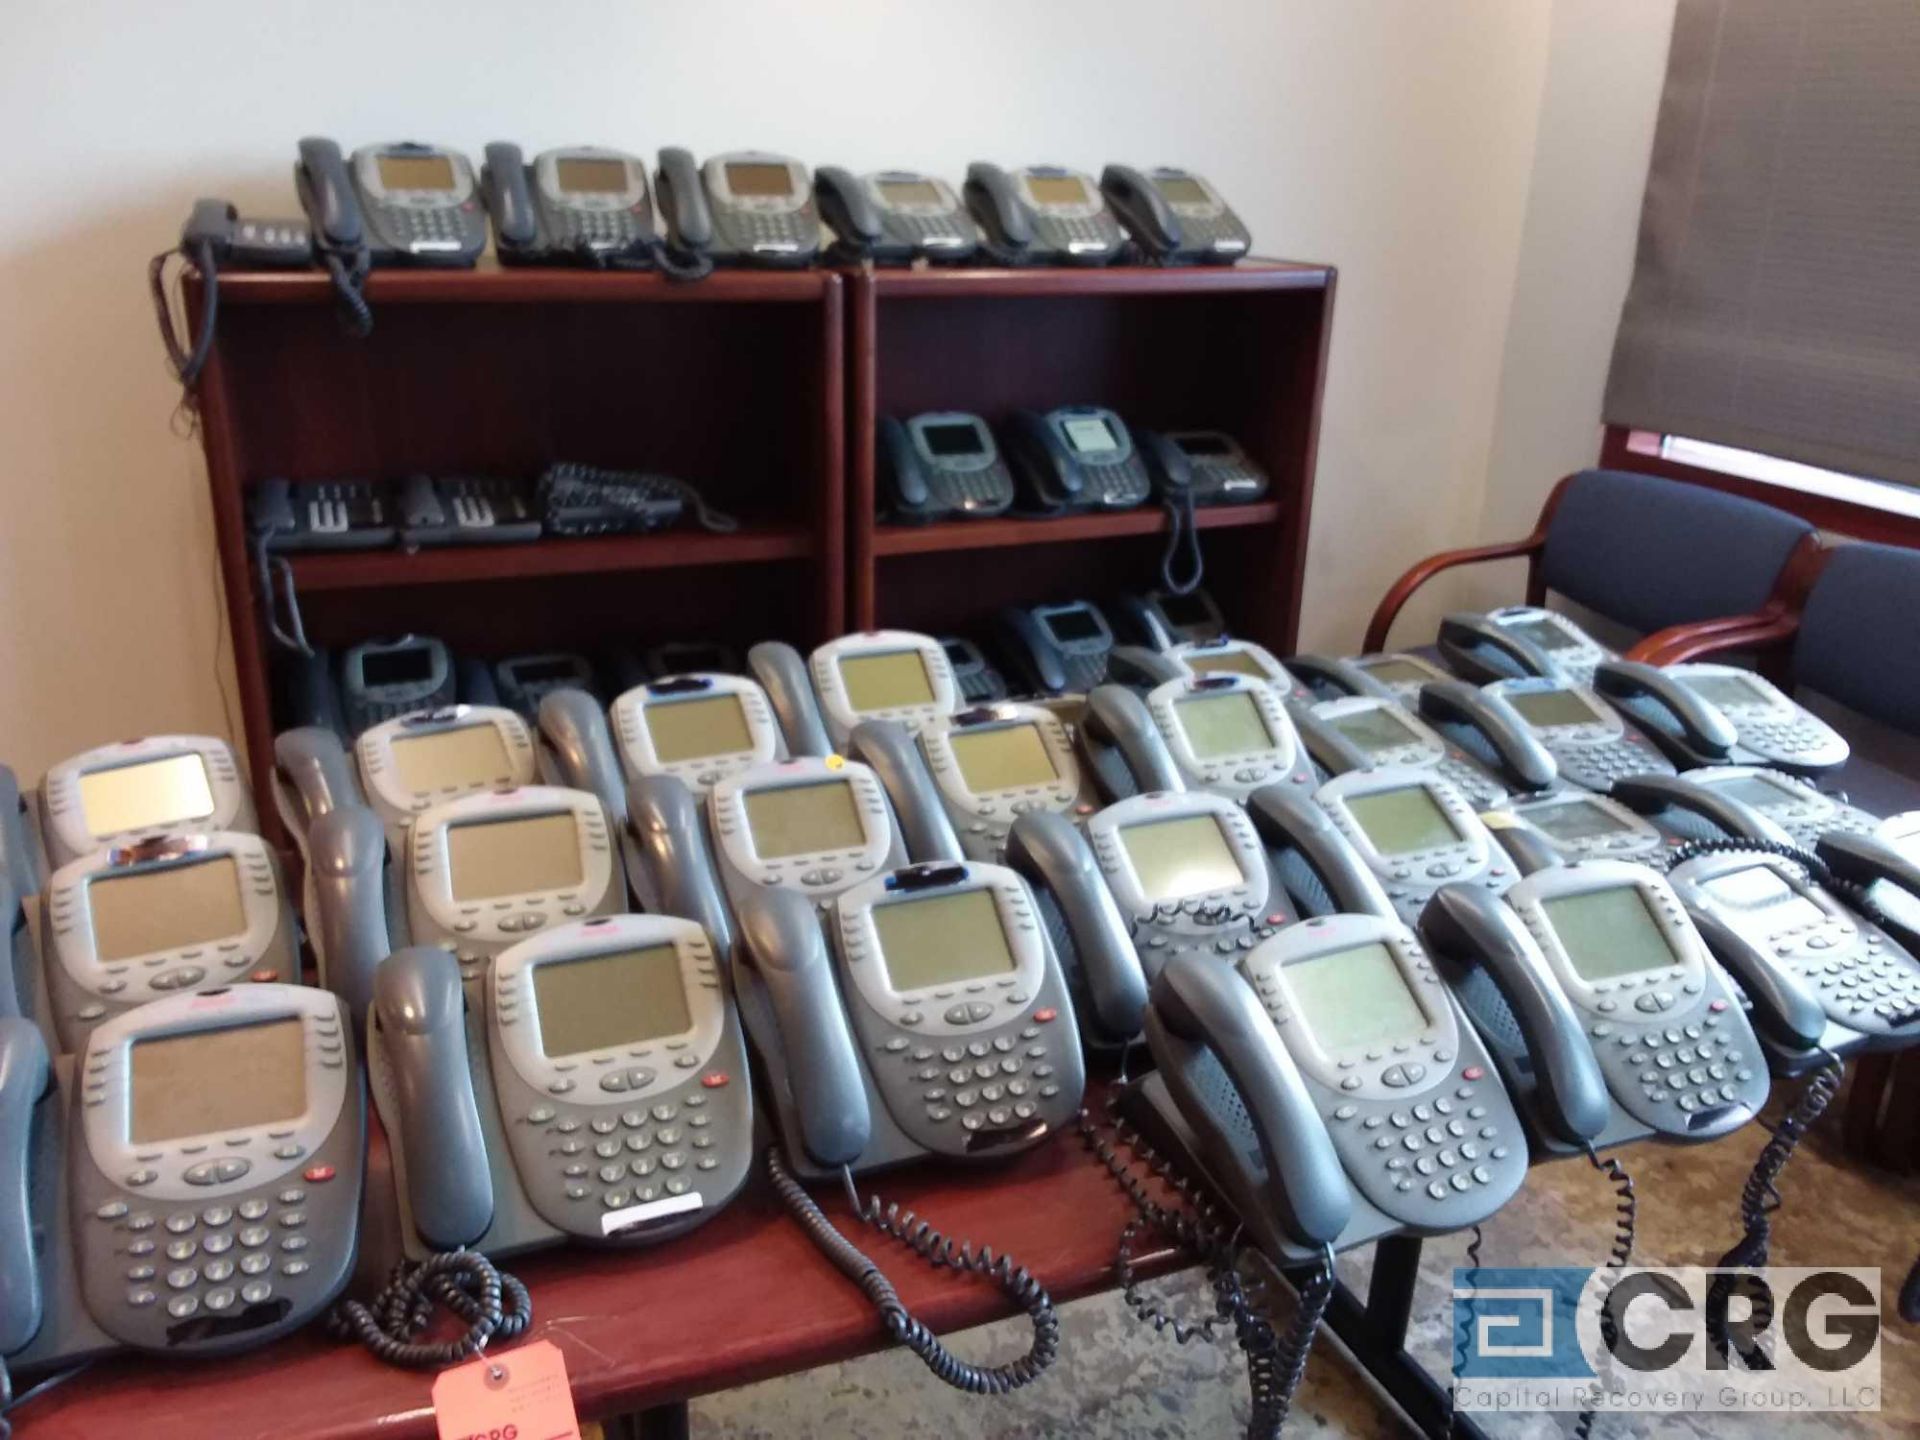 Lot of (100+) Lucent/Avaya 2420D01A-2001 telephone handsets, and components, with contents of